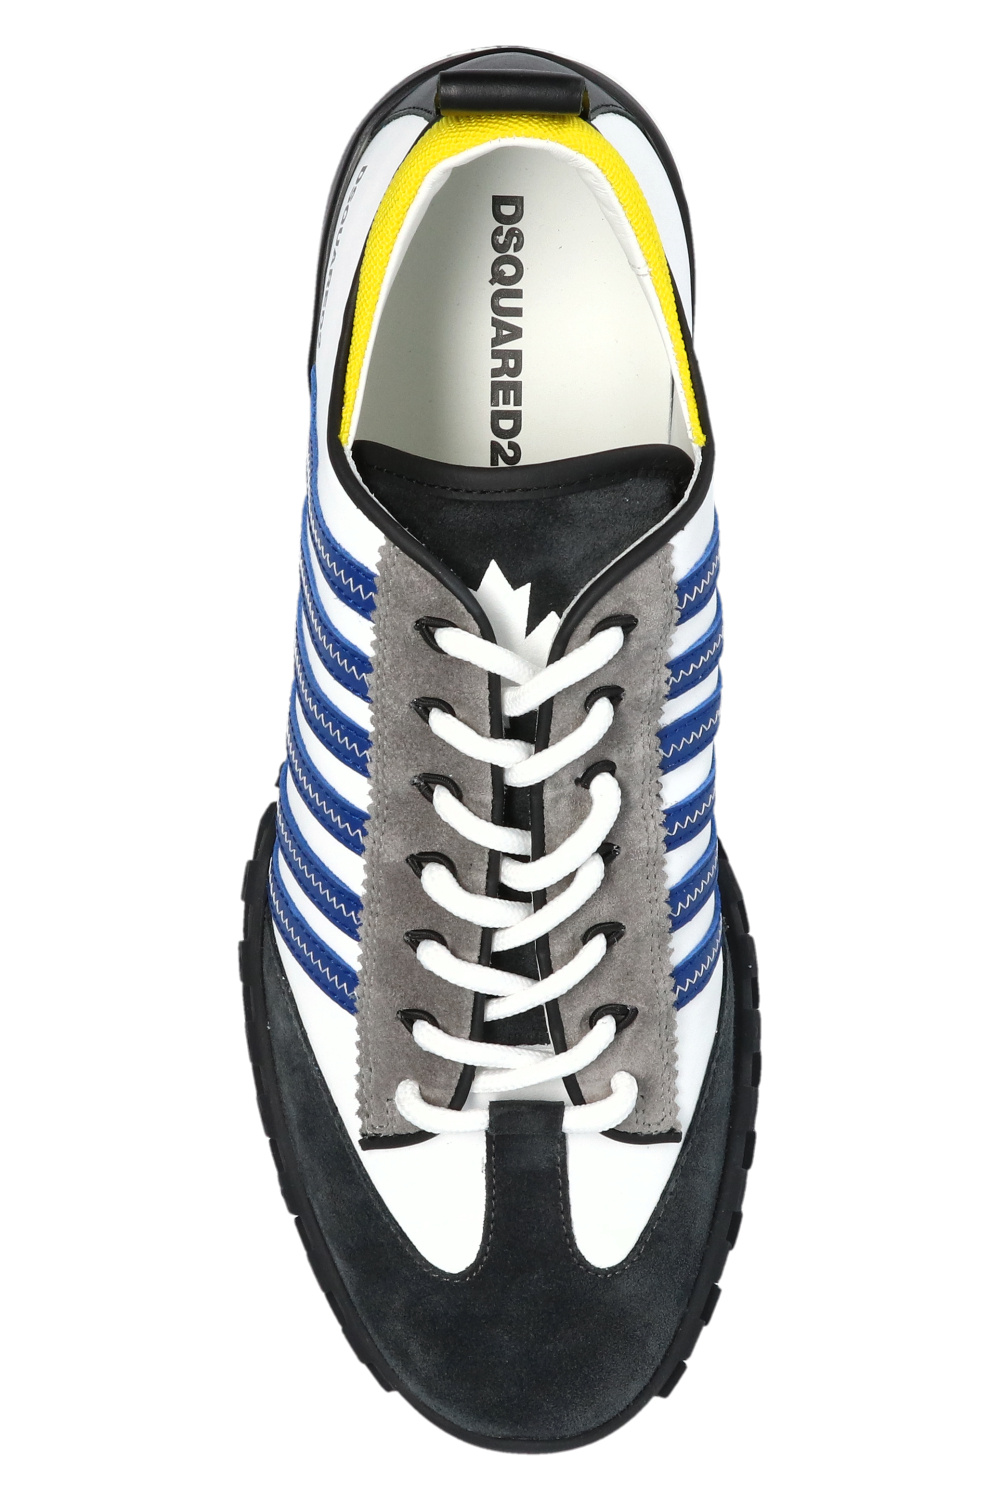 Dsquared2 sneakers of this season